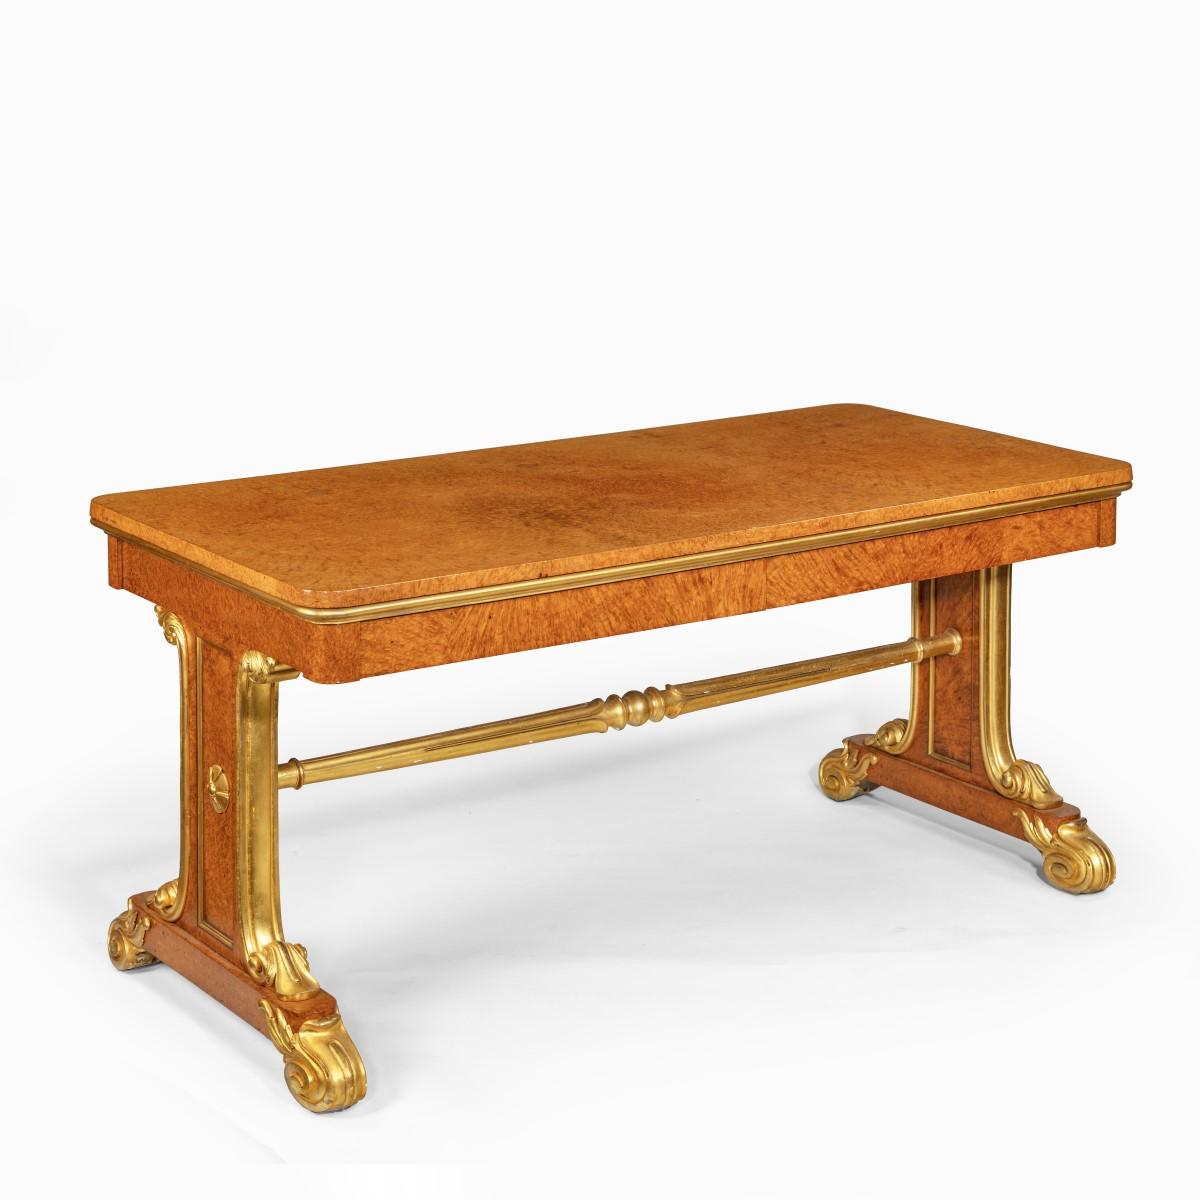 Regency Amboyna and Gilt Library Table Attributed to Seddon and Morel For Sale 3